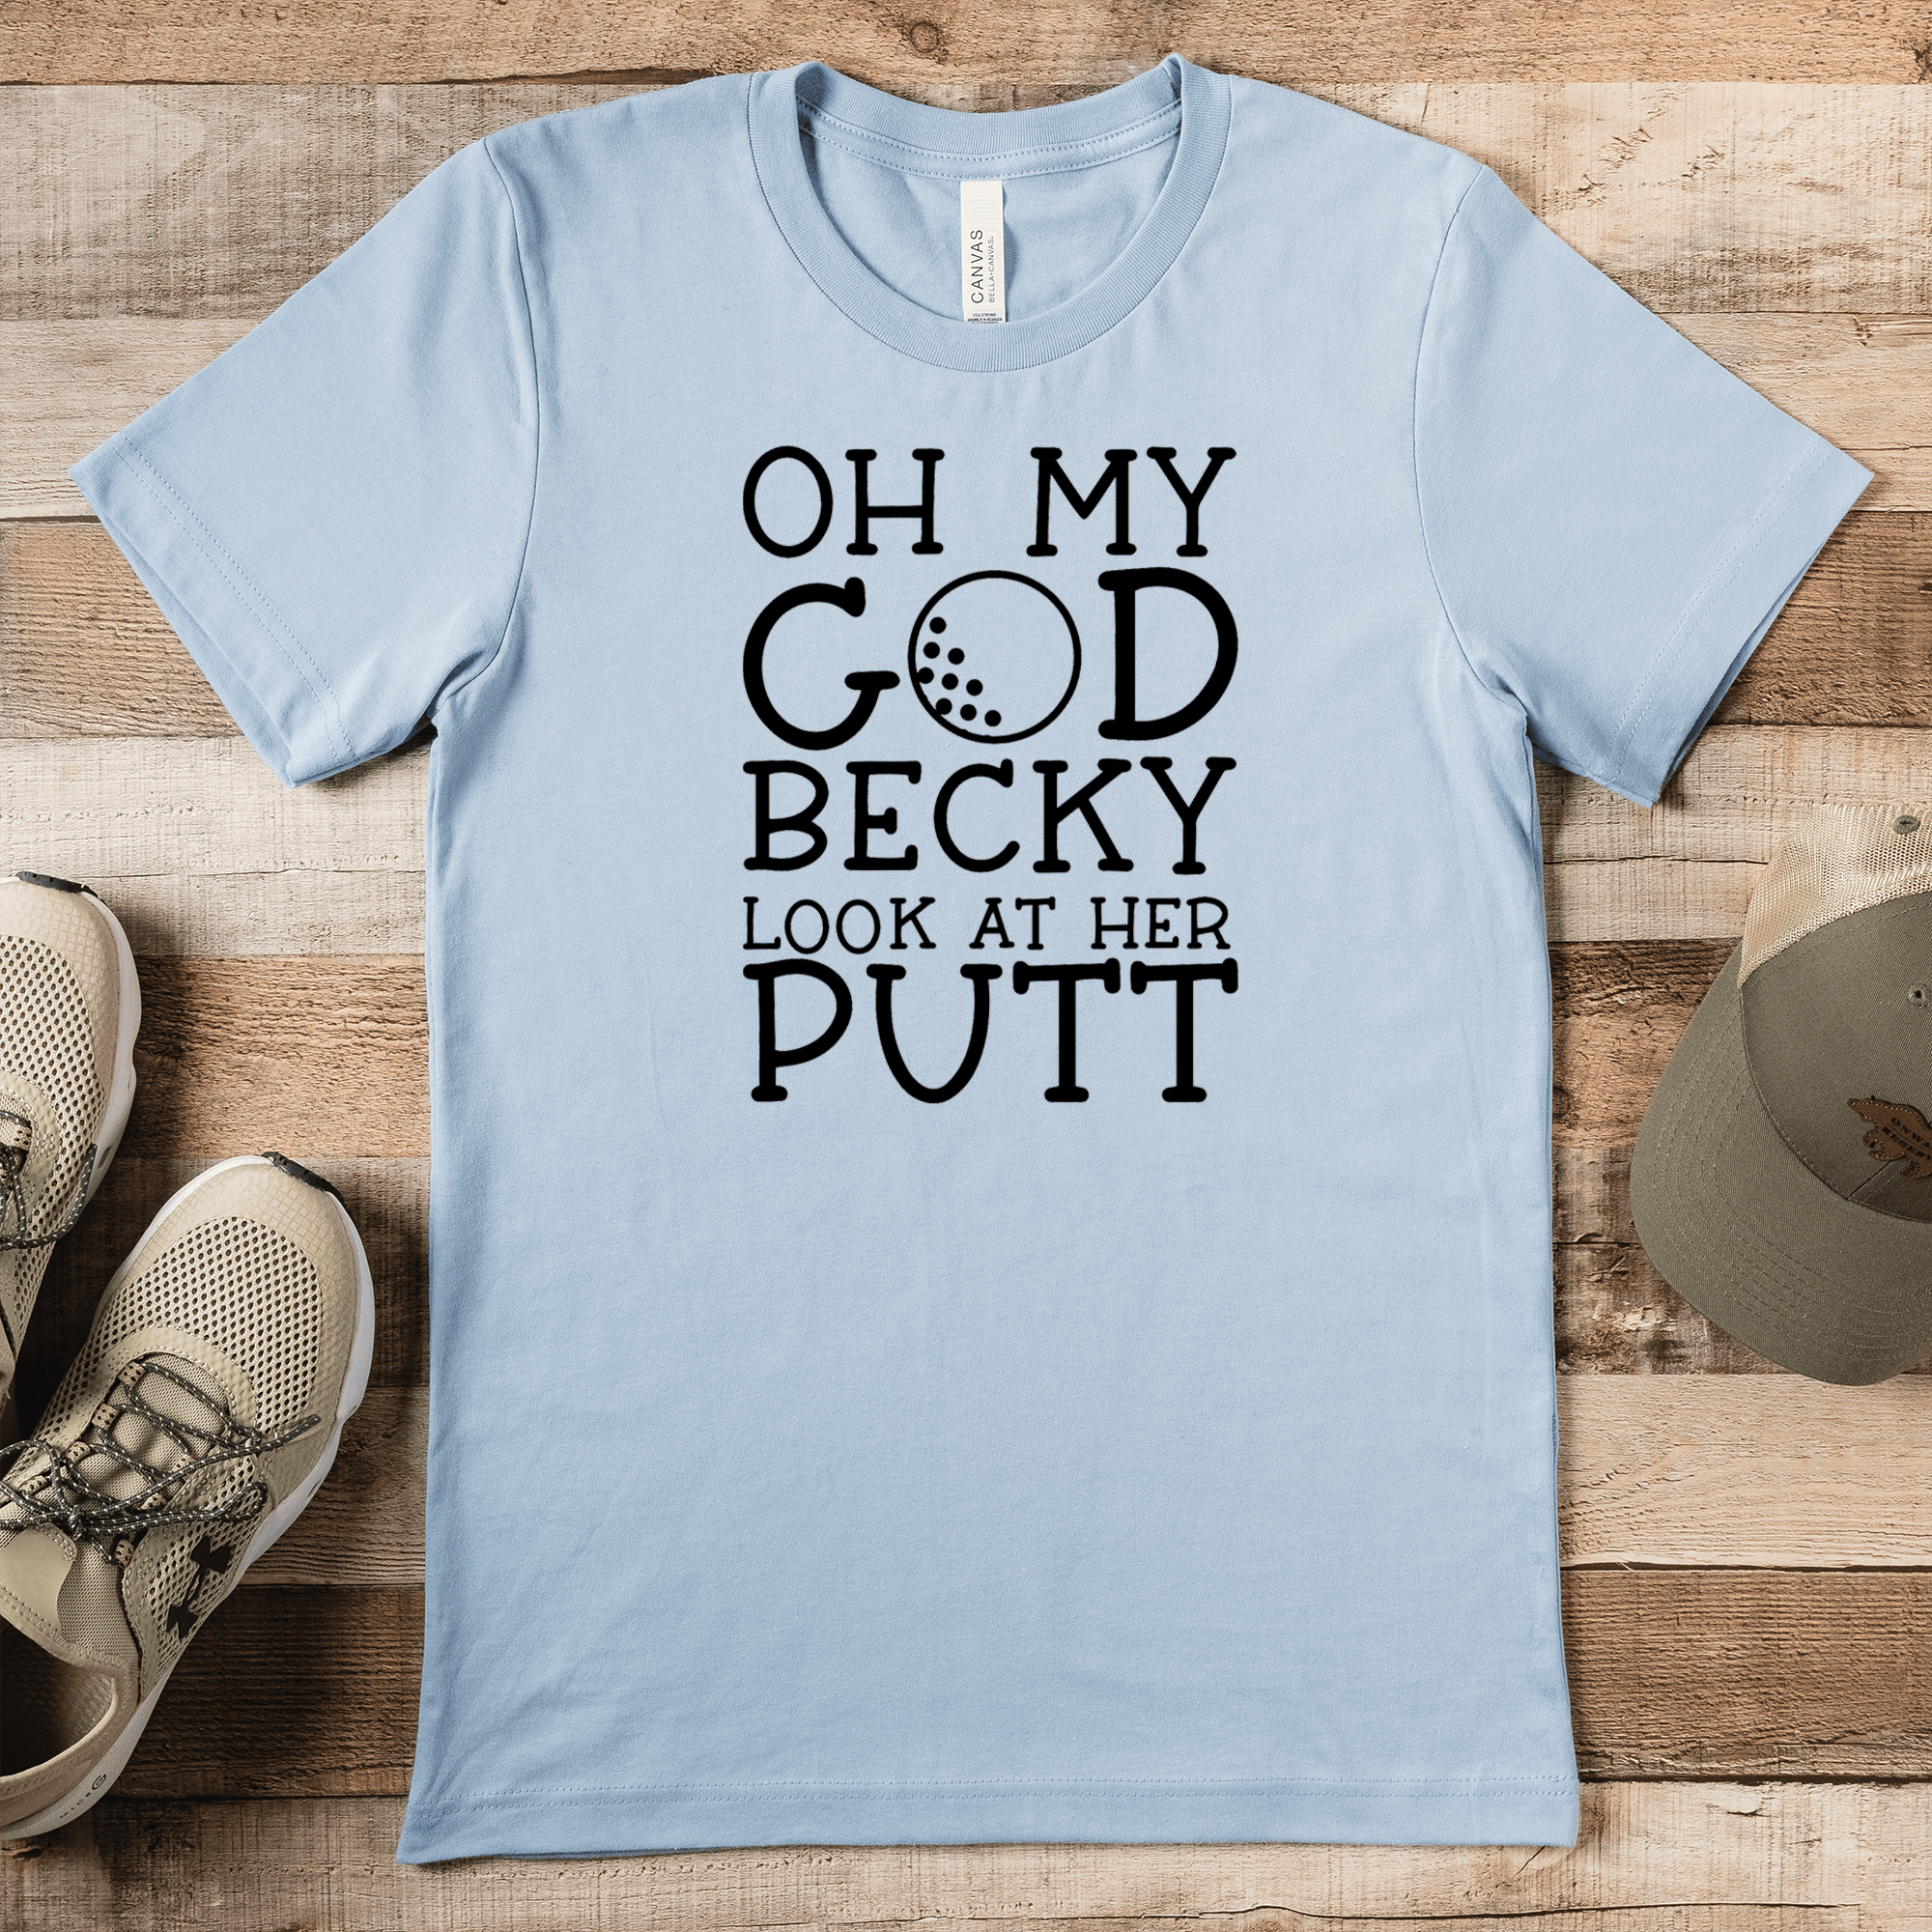 Light Blue Mens T-Shirt With Look At Her Putt Design